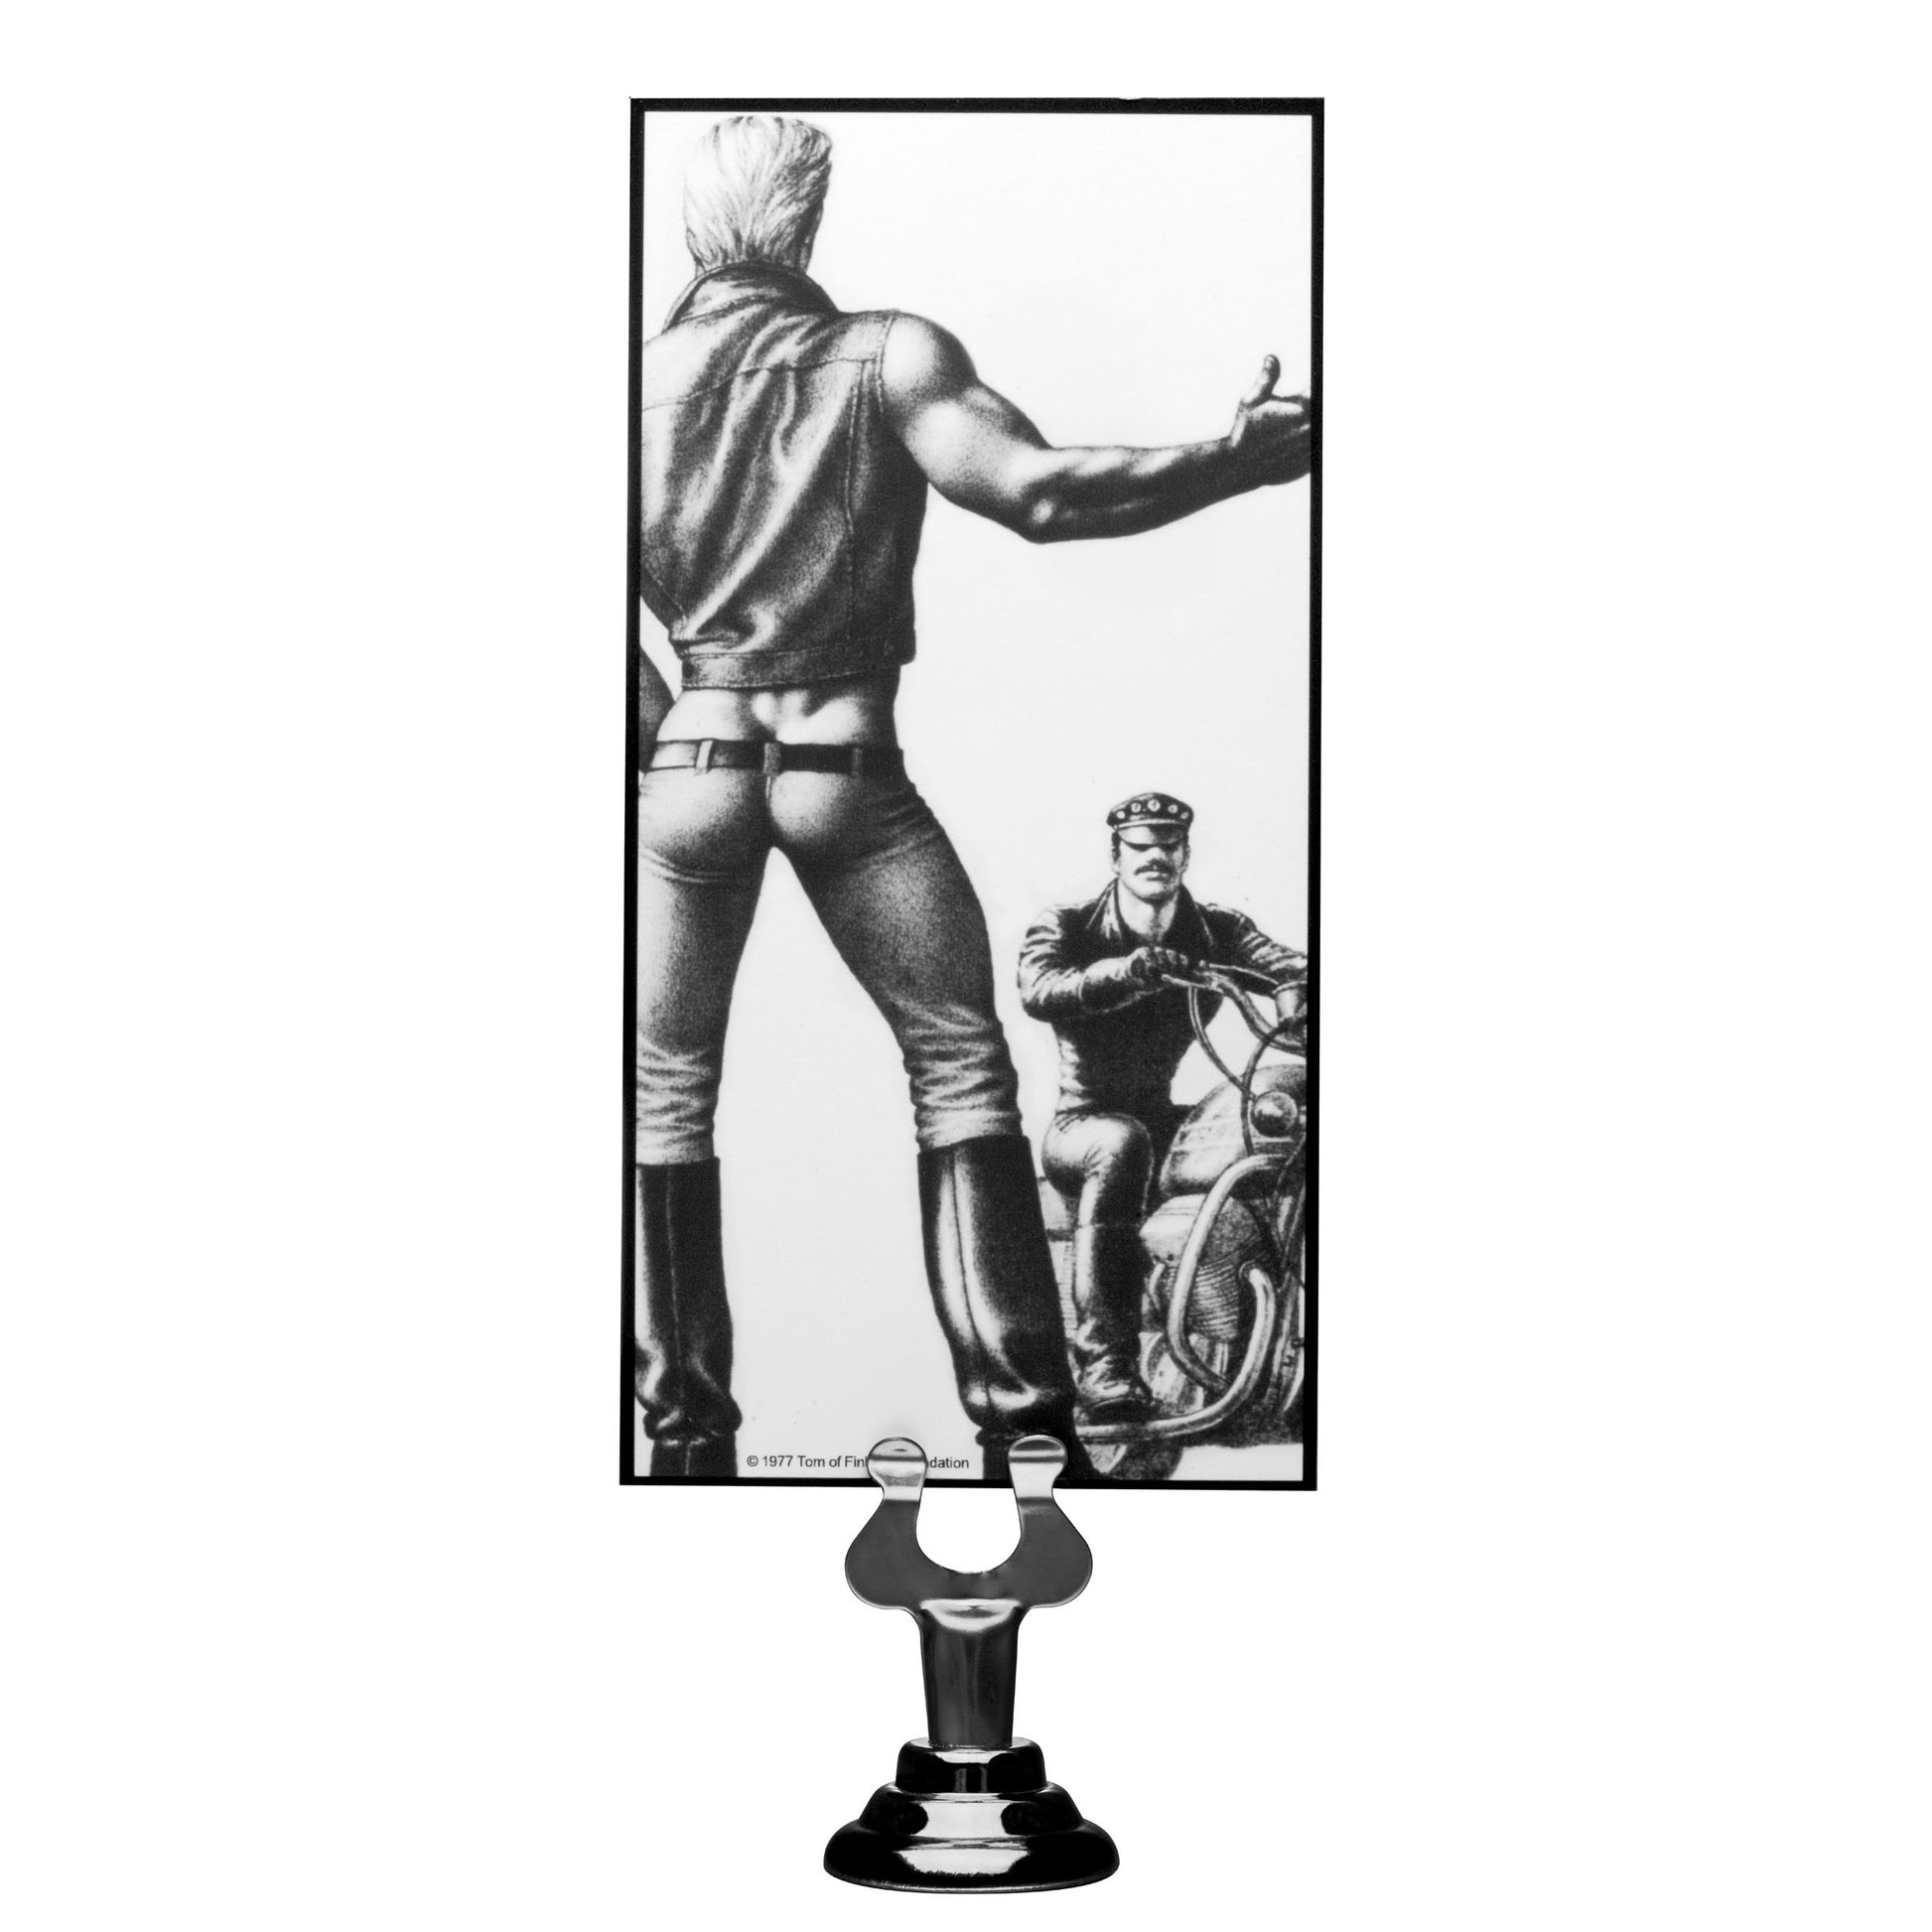 Tom of Finland Silicone P-Spot Vibe - UABDSM